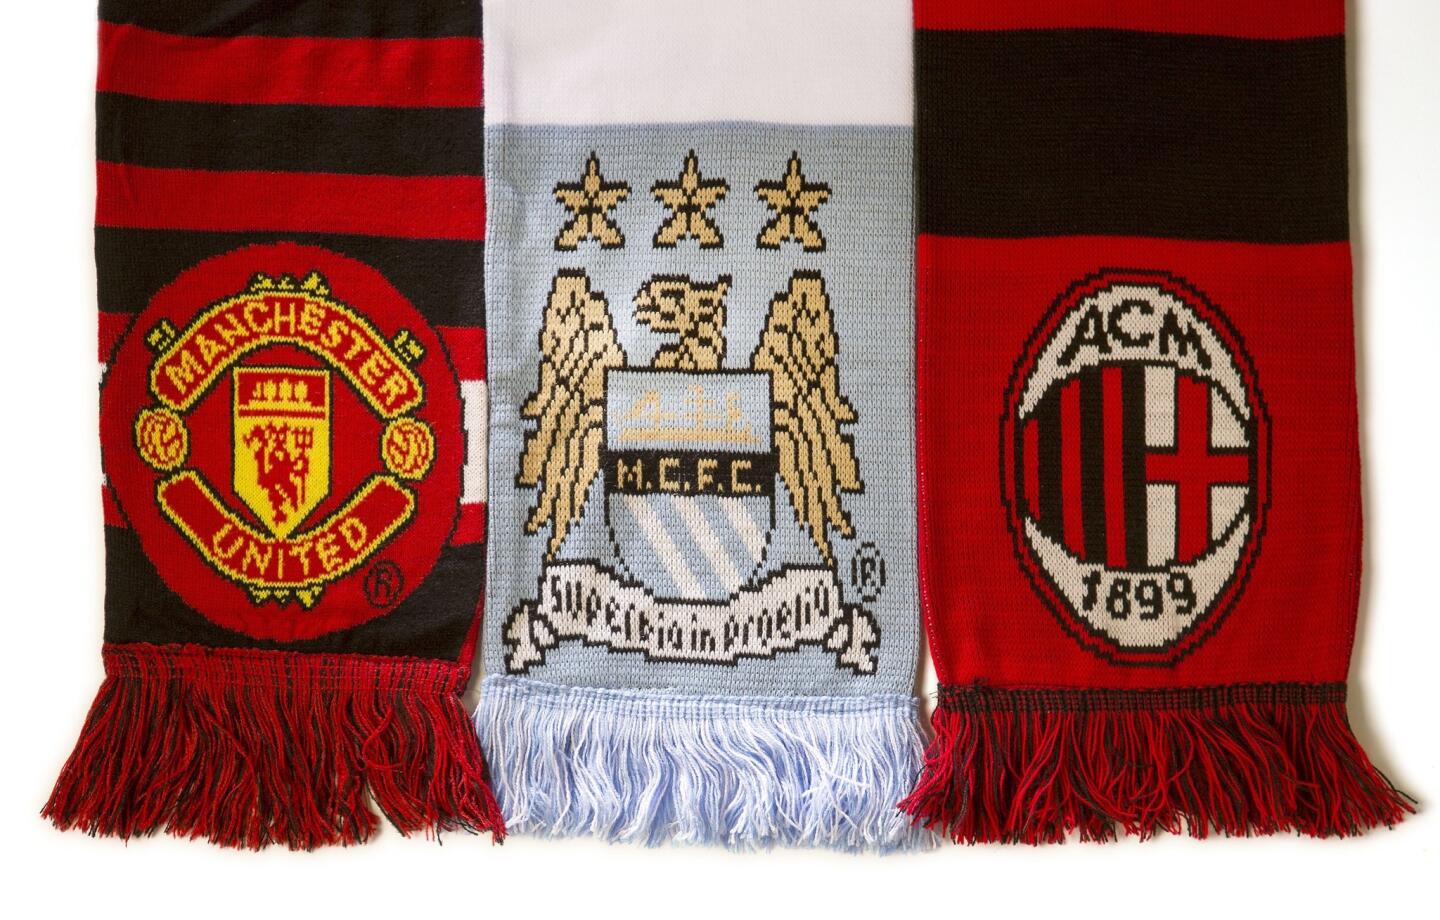 Left to right: Manchester United, Manchester City and A.C. Milan.